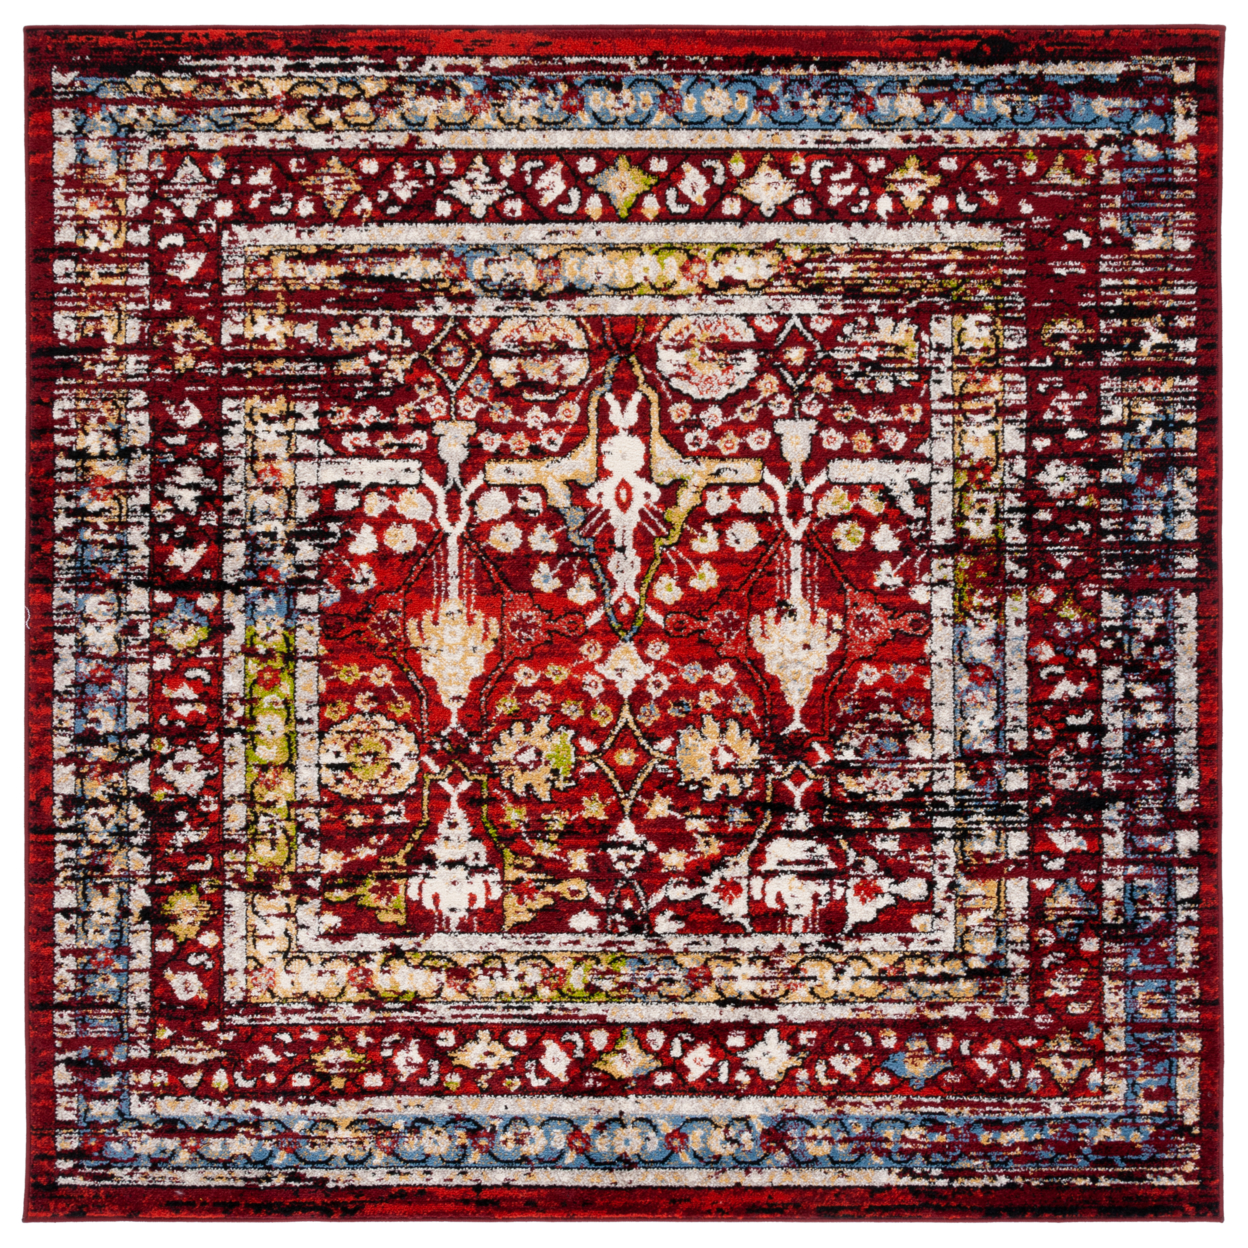 SAFAVIEH Amsterdam Collection AMS177Q Red Rug - 6' 7 Square